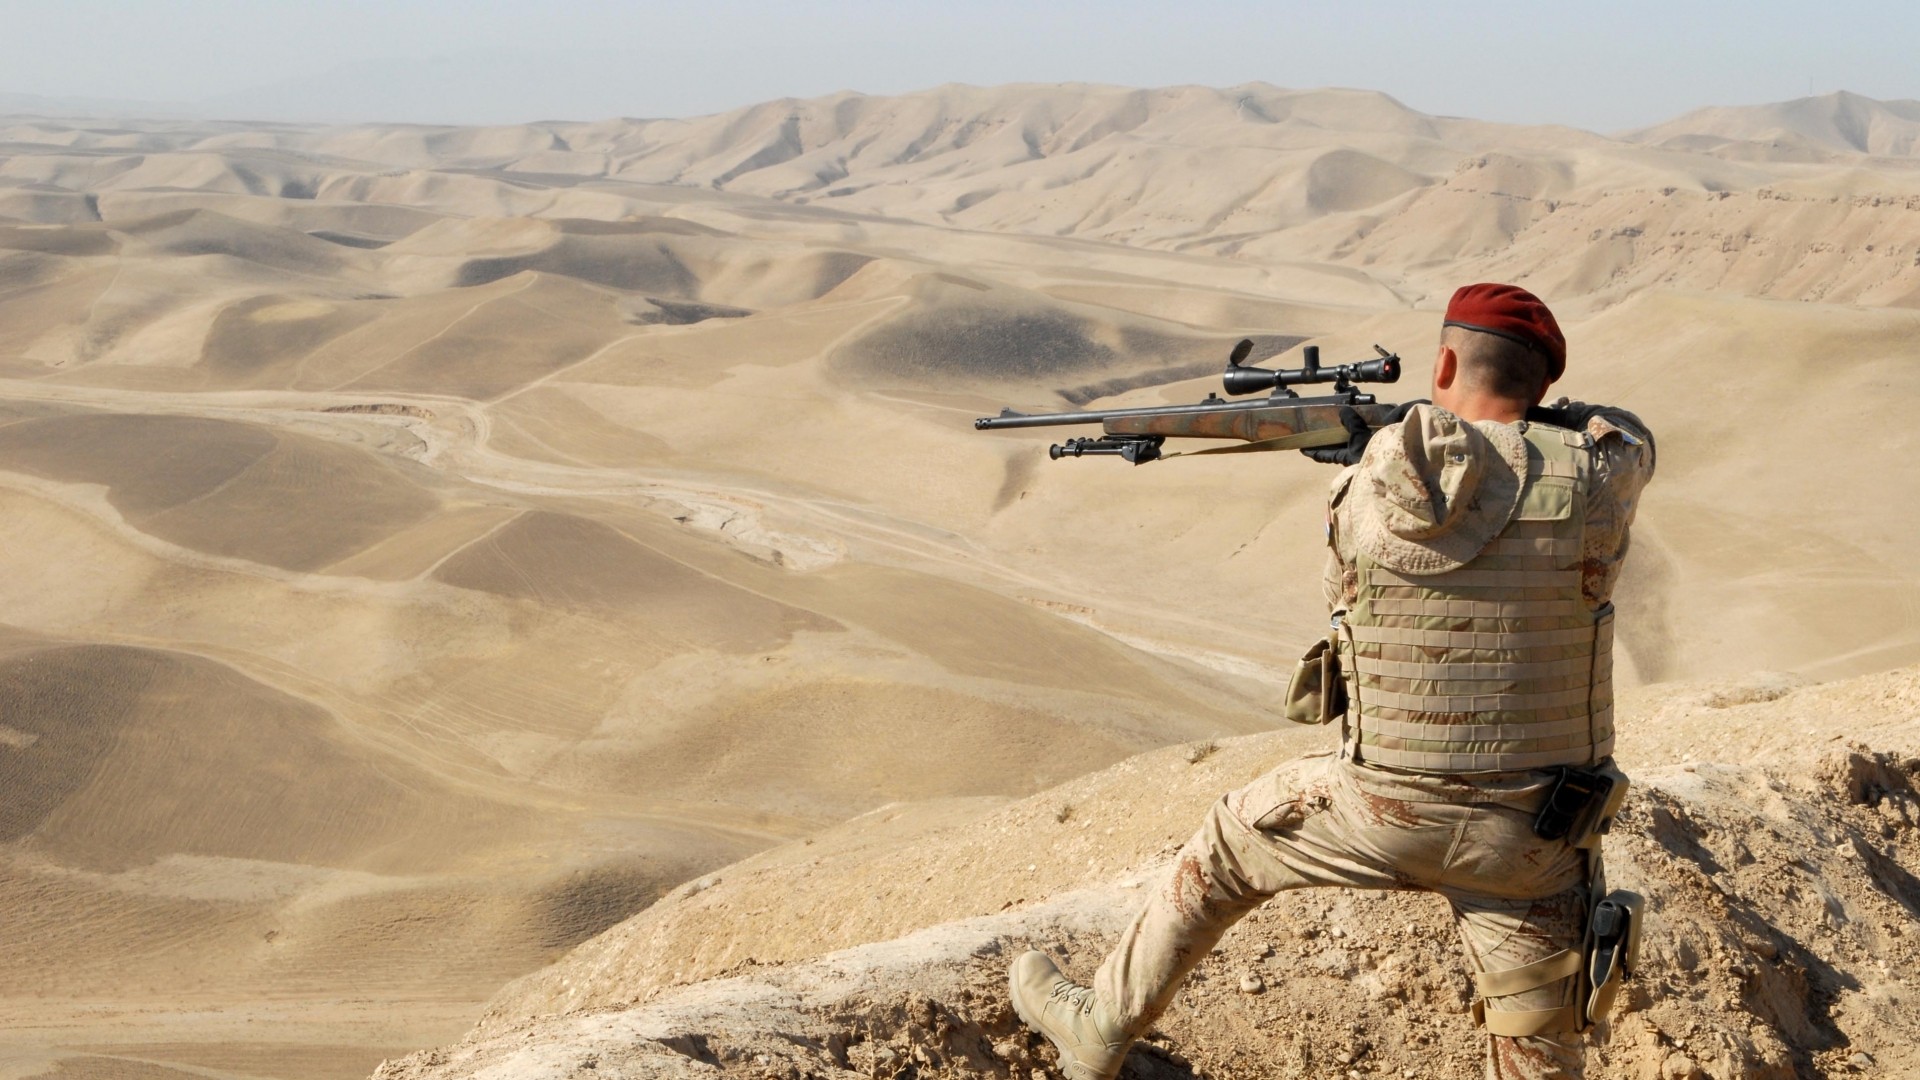 People 1920x1080 sniper rifle soldier desert Croatian Afghanistan weapon men landscape men outdoors aiming military